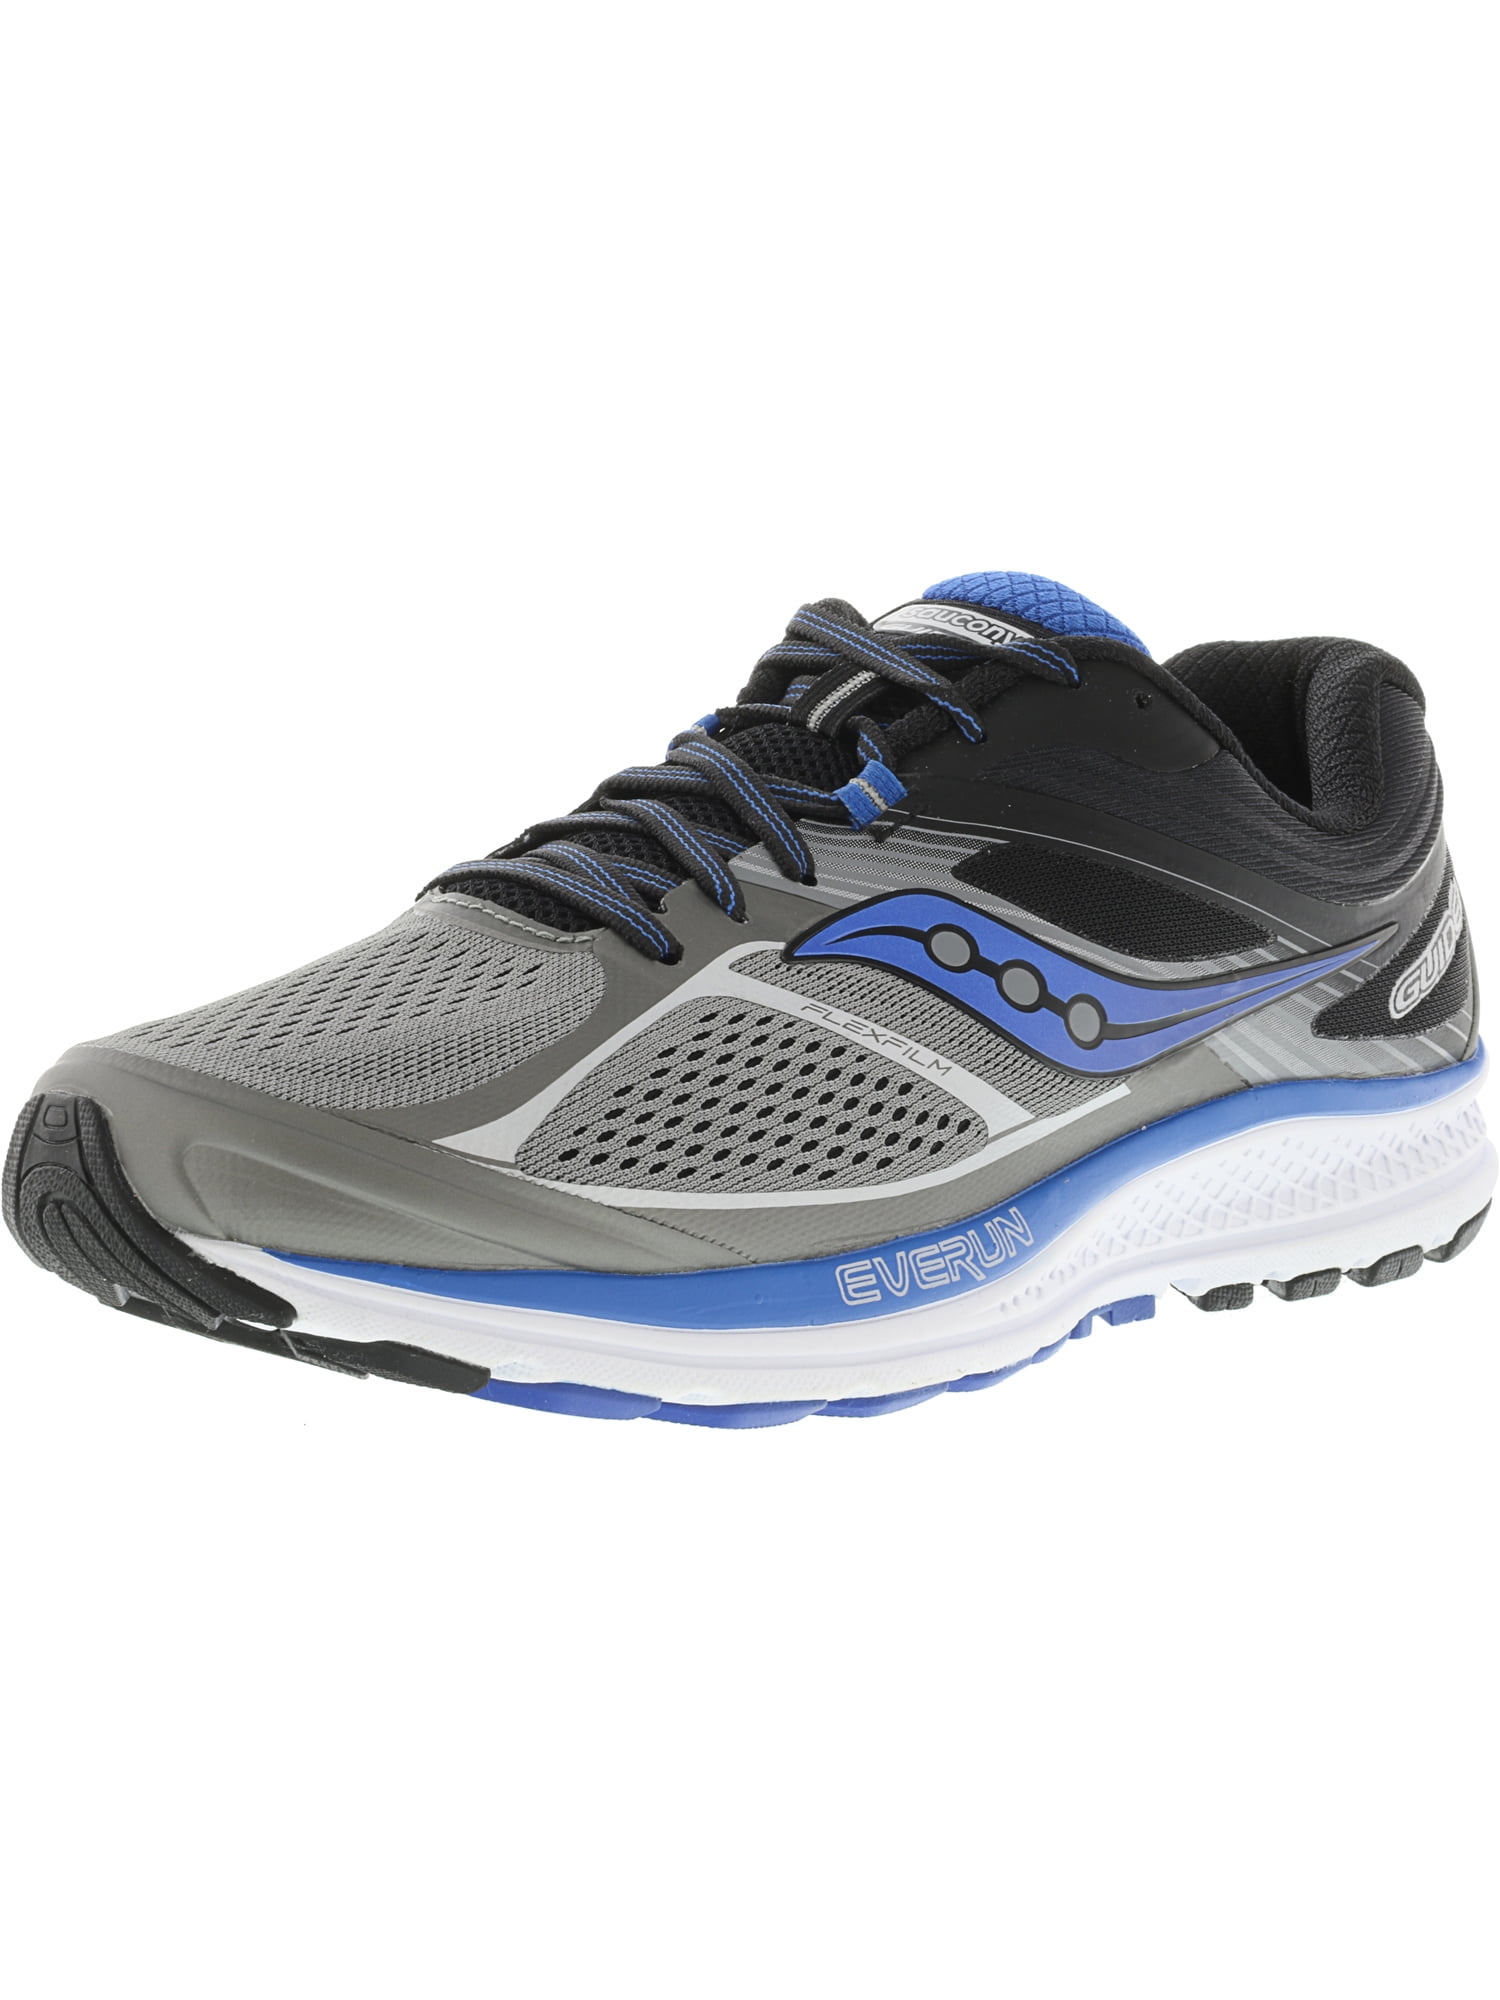 saucony guide 10 mens running shoes